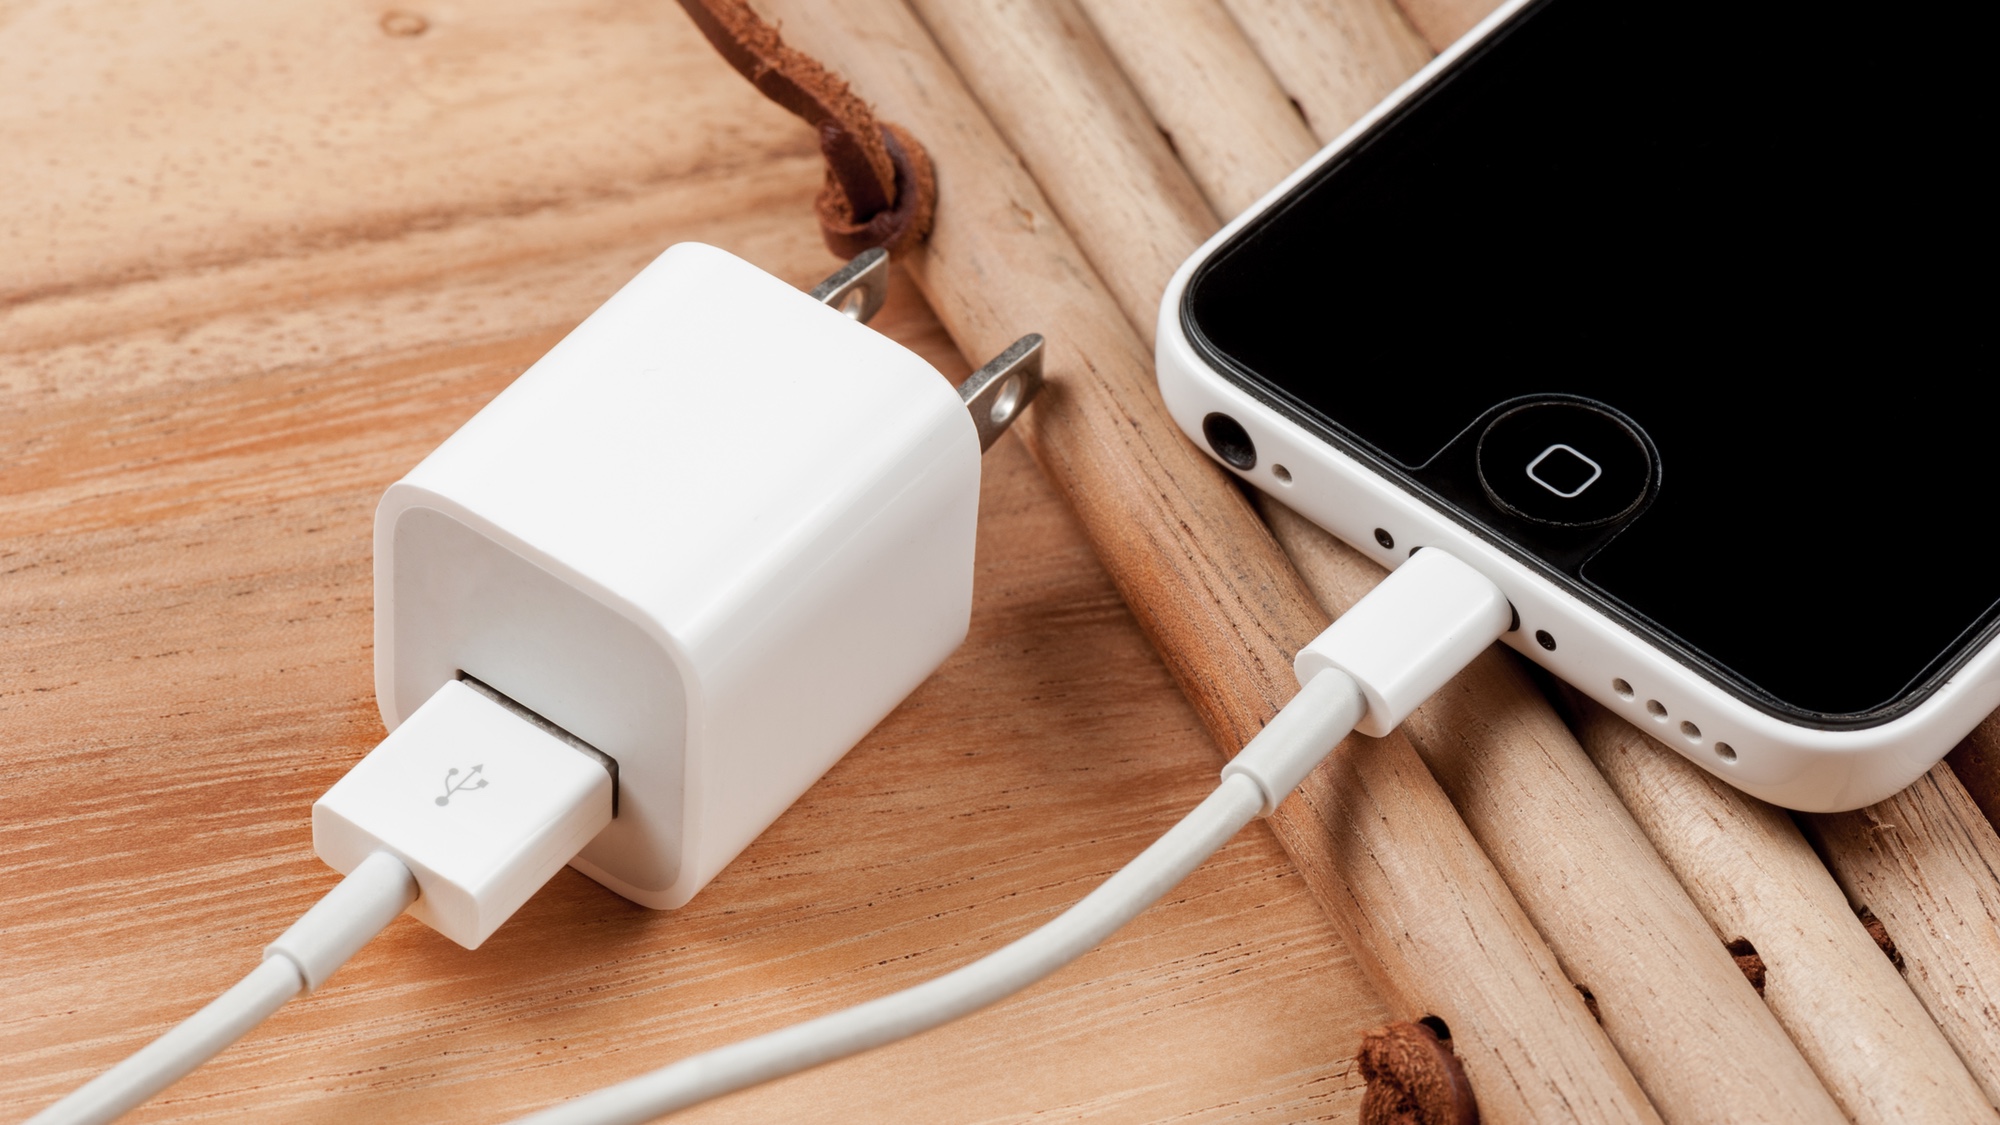 Apple iPhone lightning charger